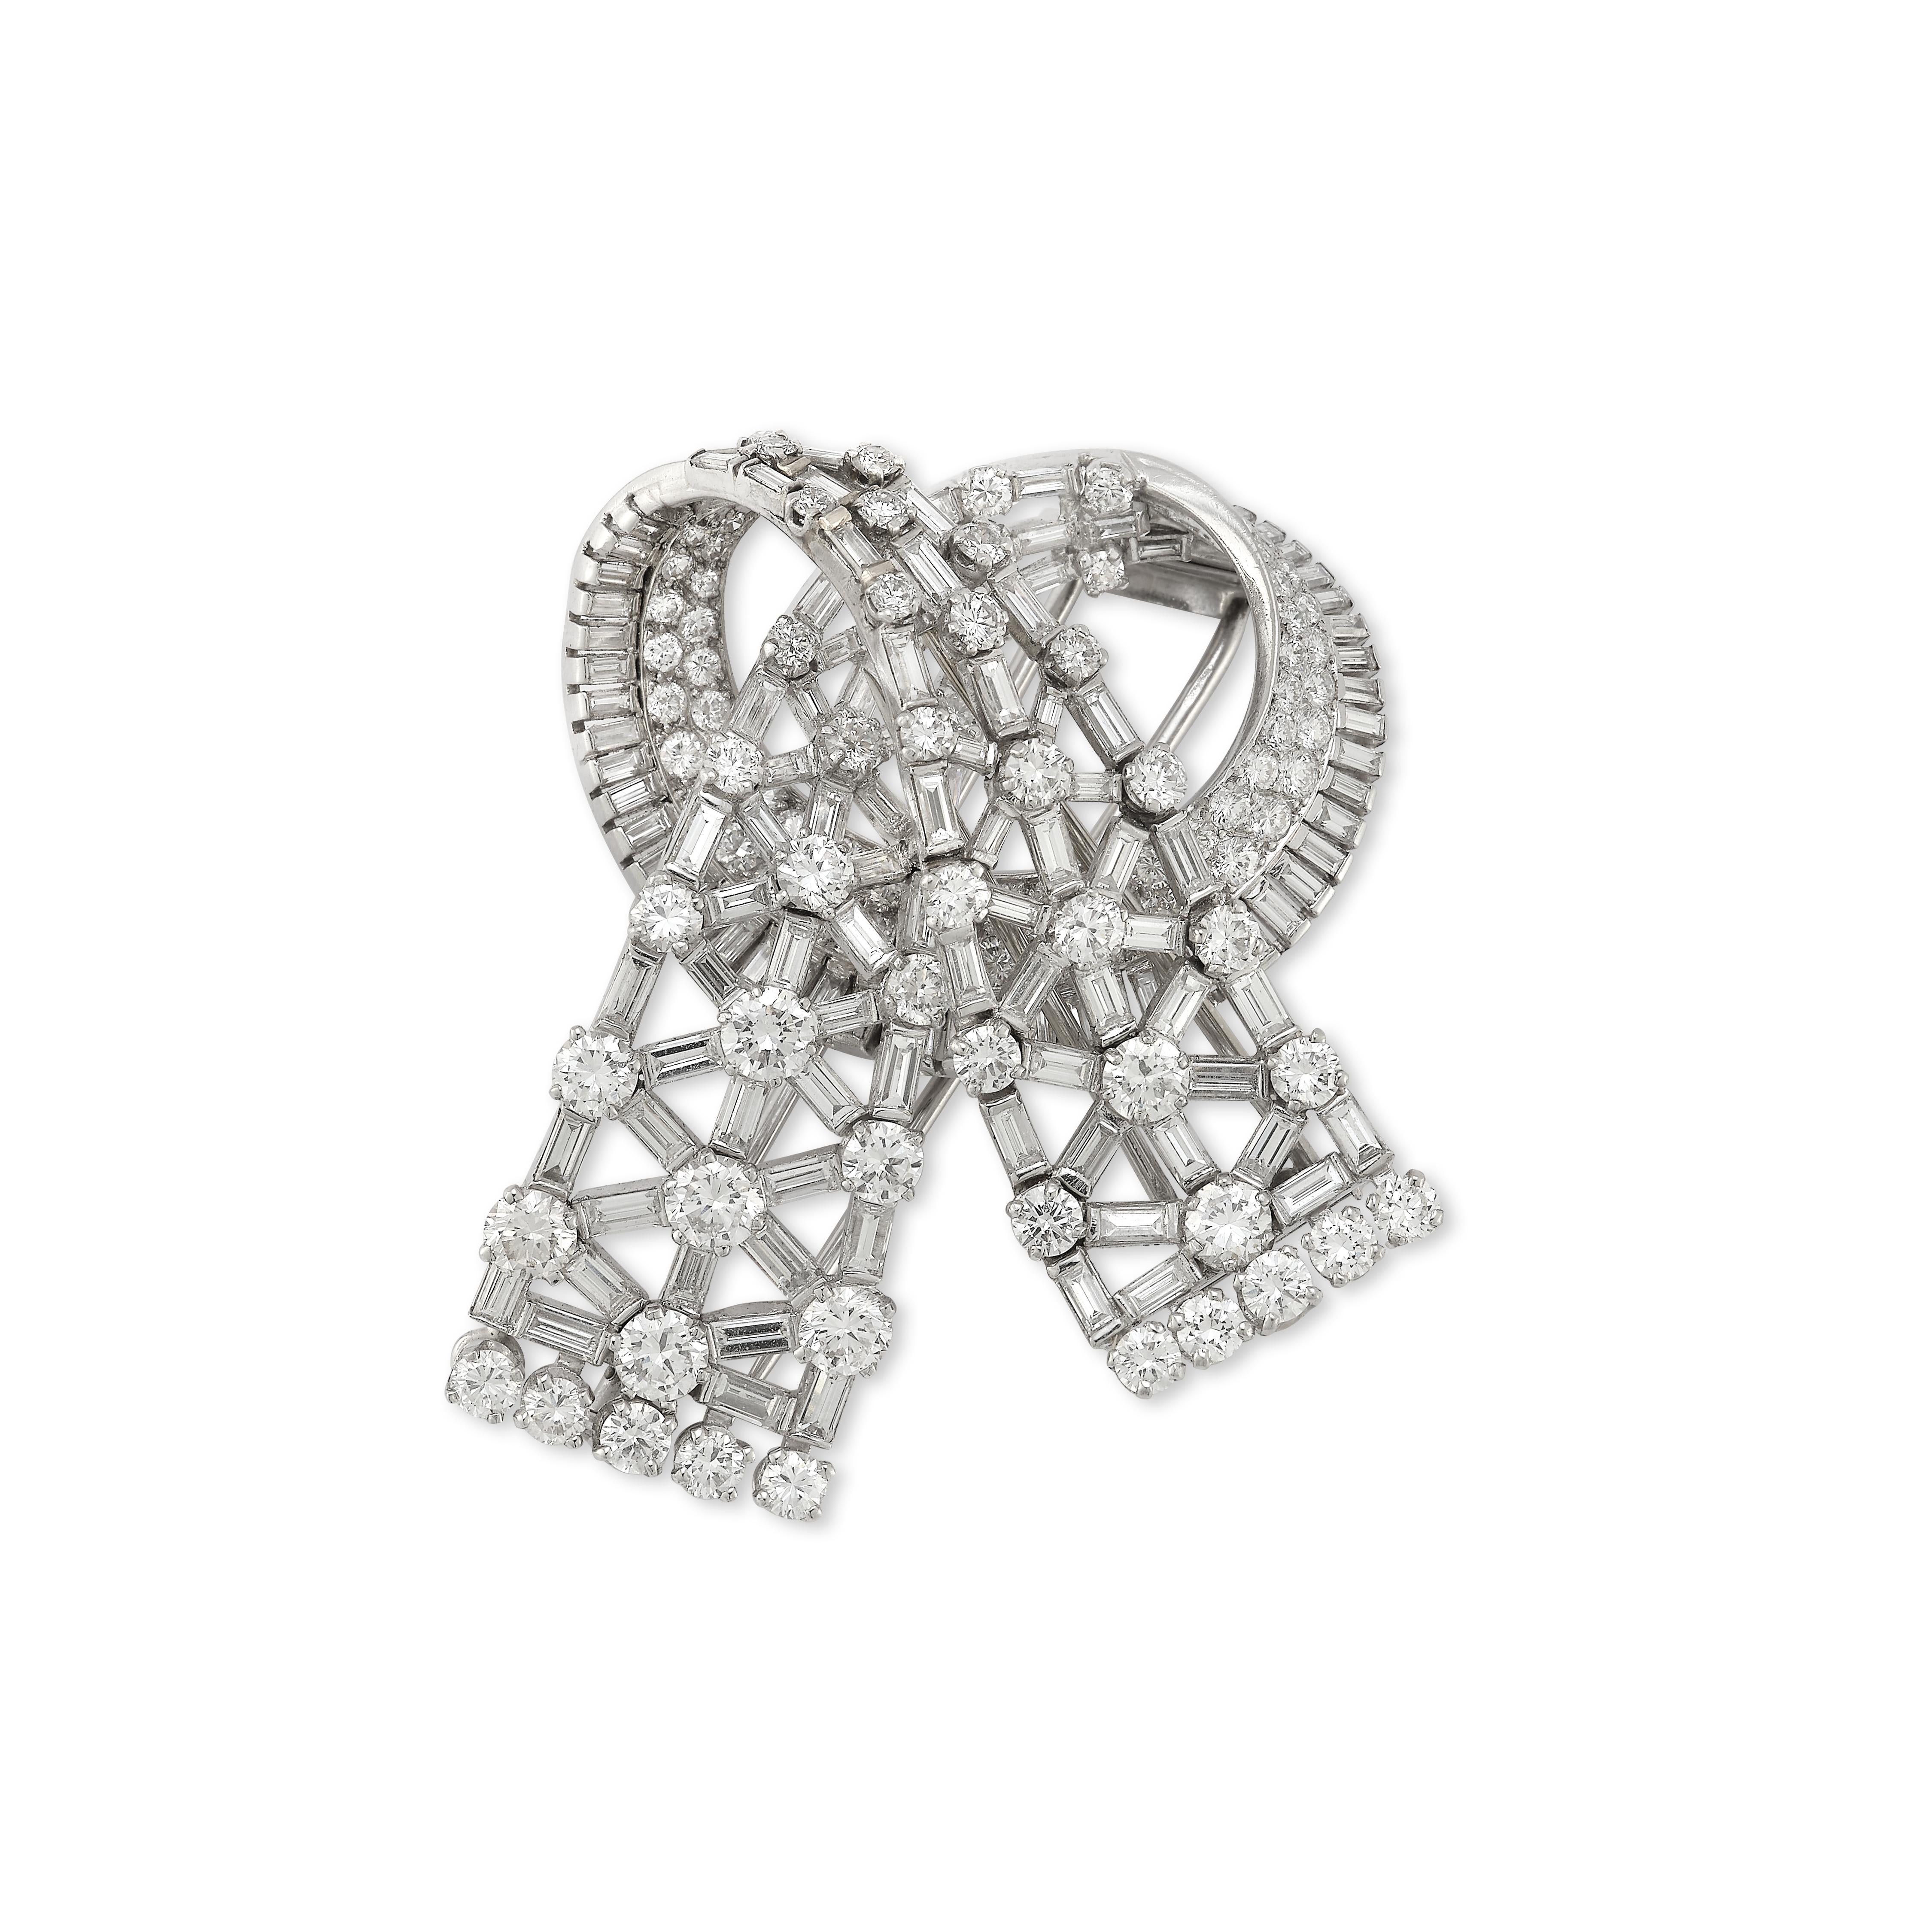 Mellerio Paris Double Clip Bow Brooch

A platinum brooch set with 103 brilliant cut diamonds and 131 baguette cut diamonds weighing approximately 28.08 carats total

Converts into two brooches

Signed Mellerio Paris & numbered

Metal Type: